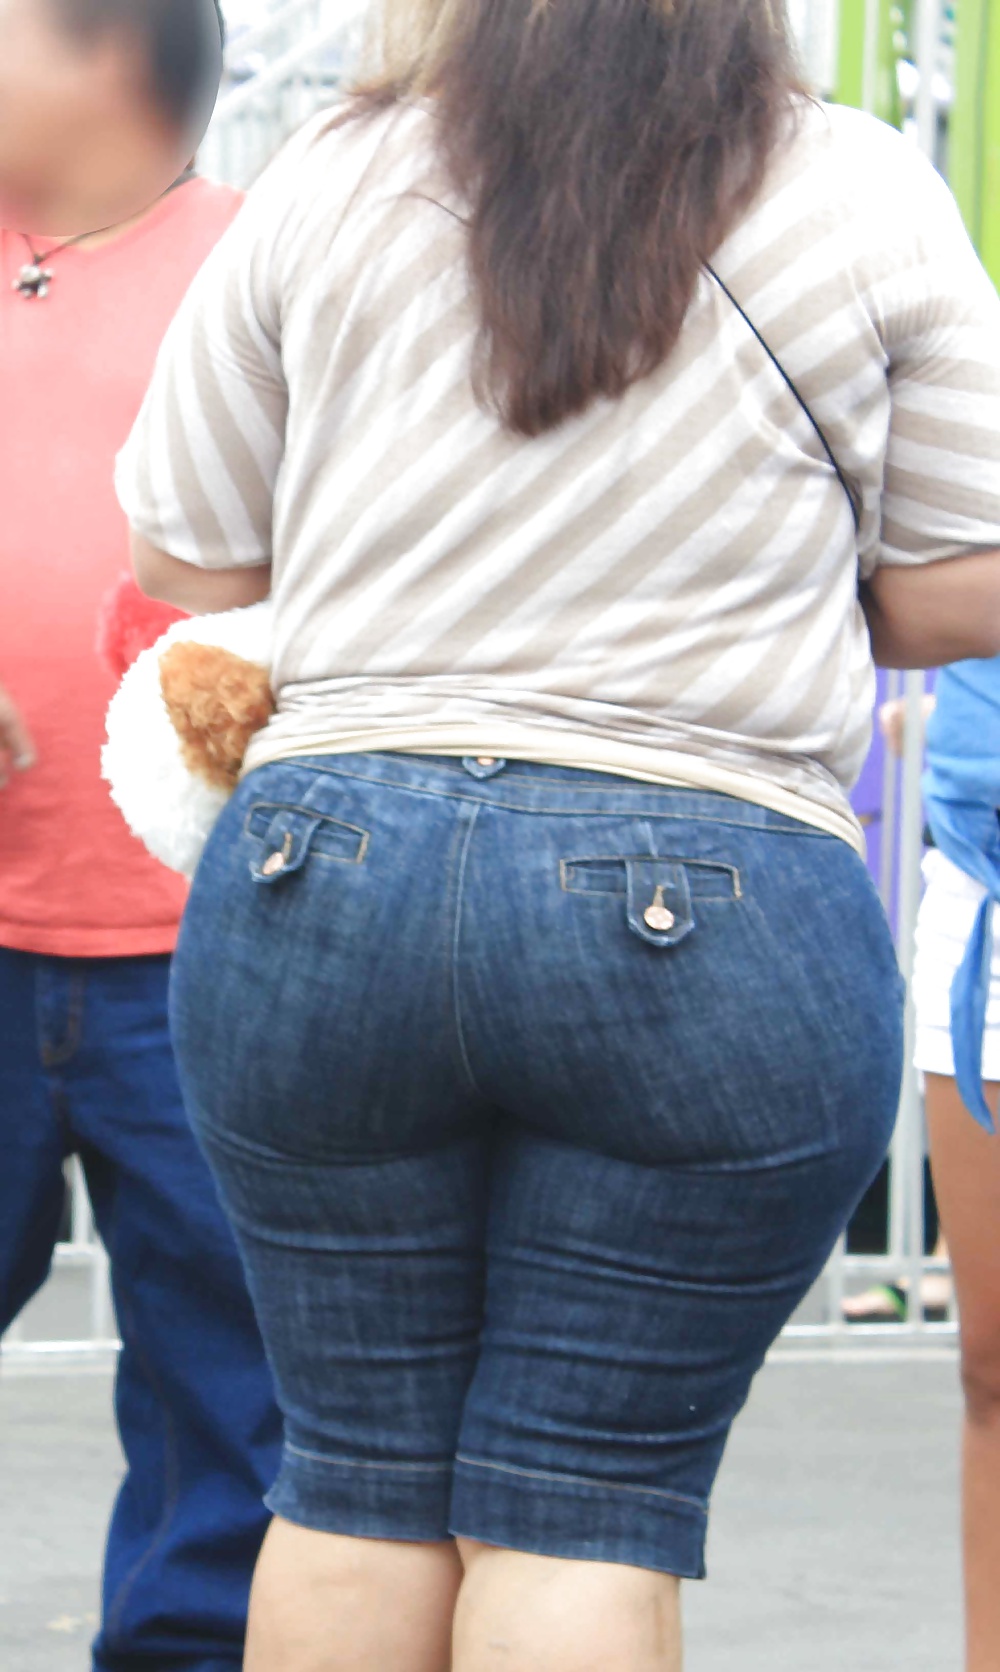 Candid Huge Latina Mom Ass in Jeans #31359610